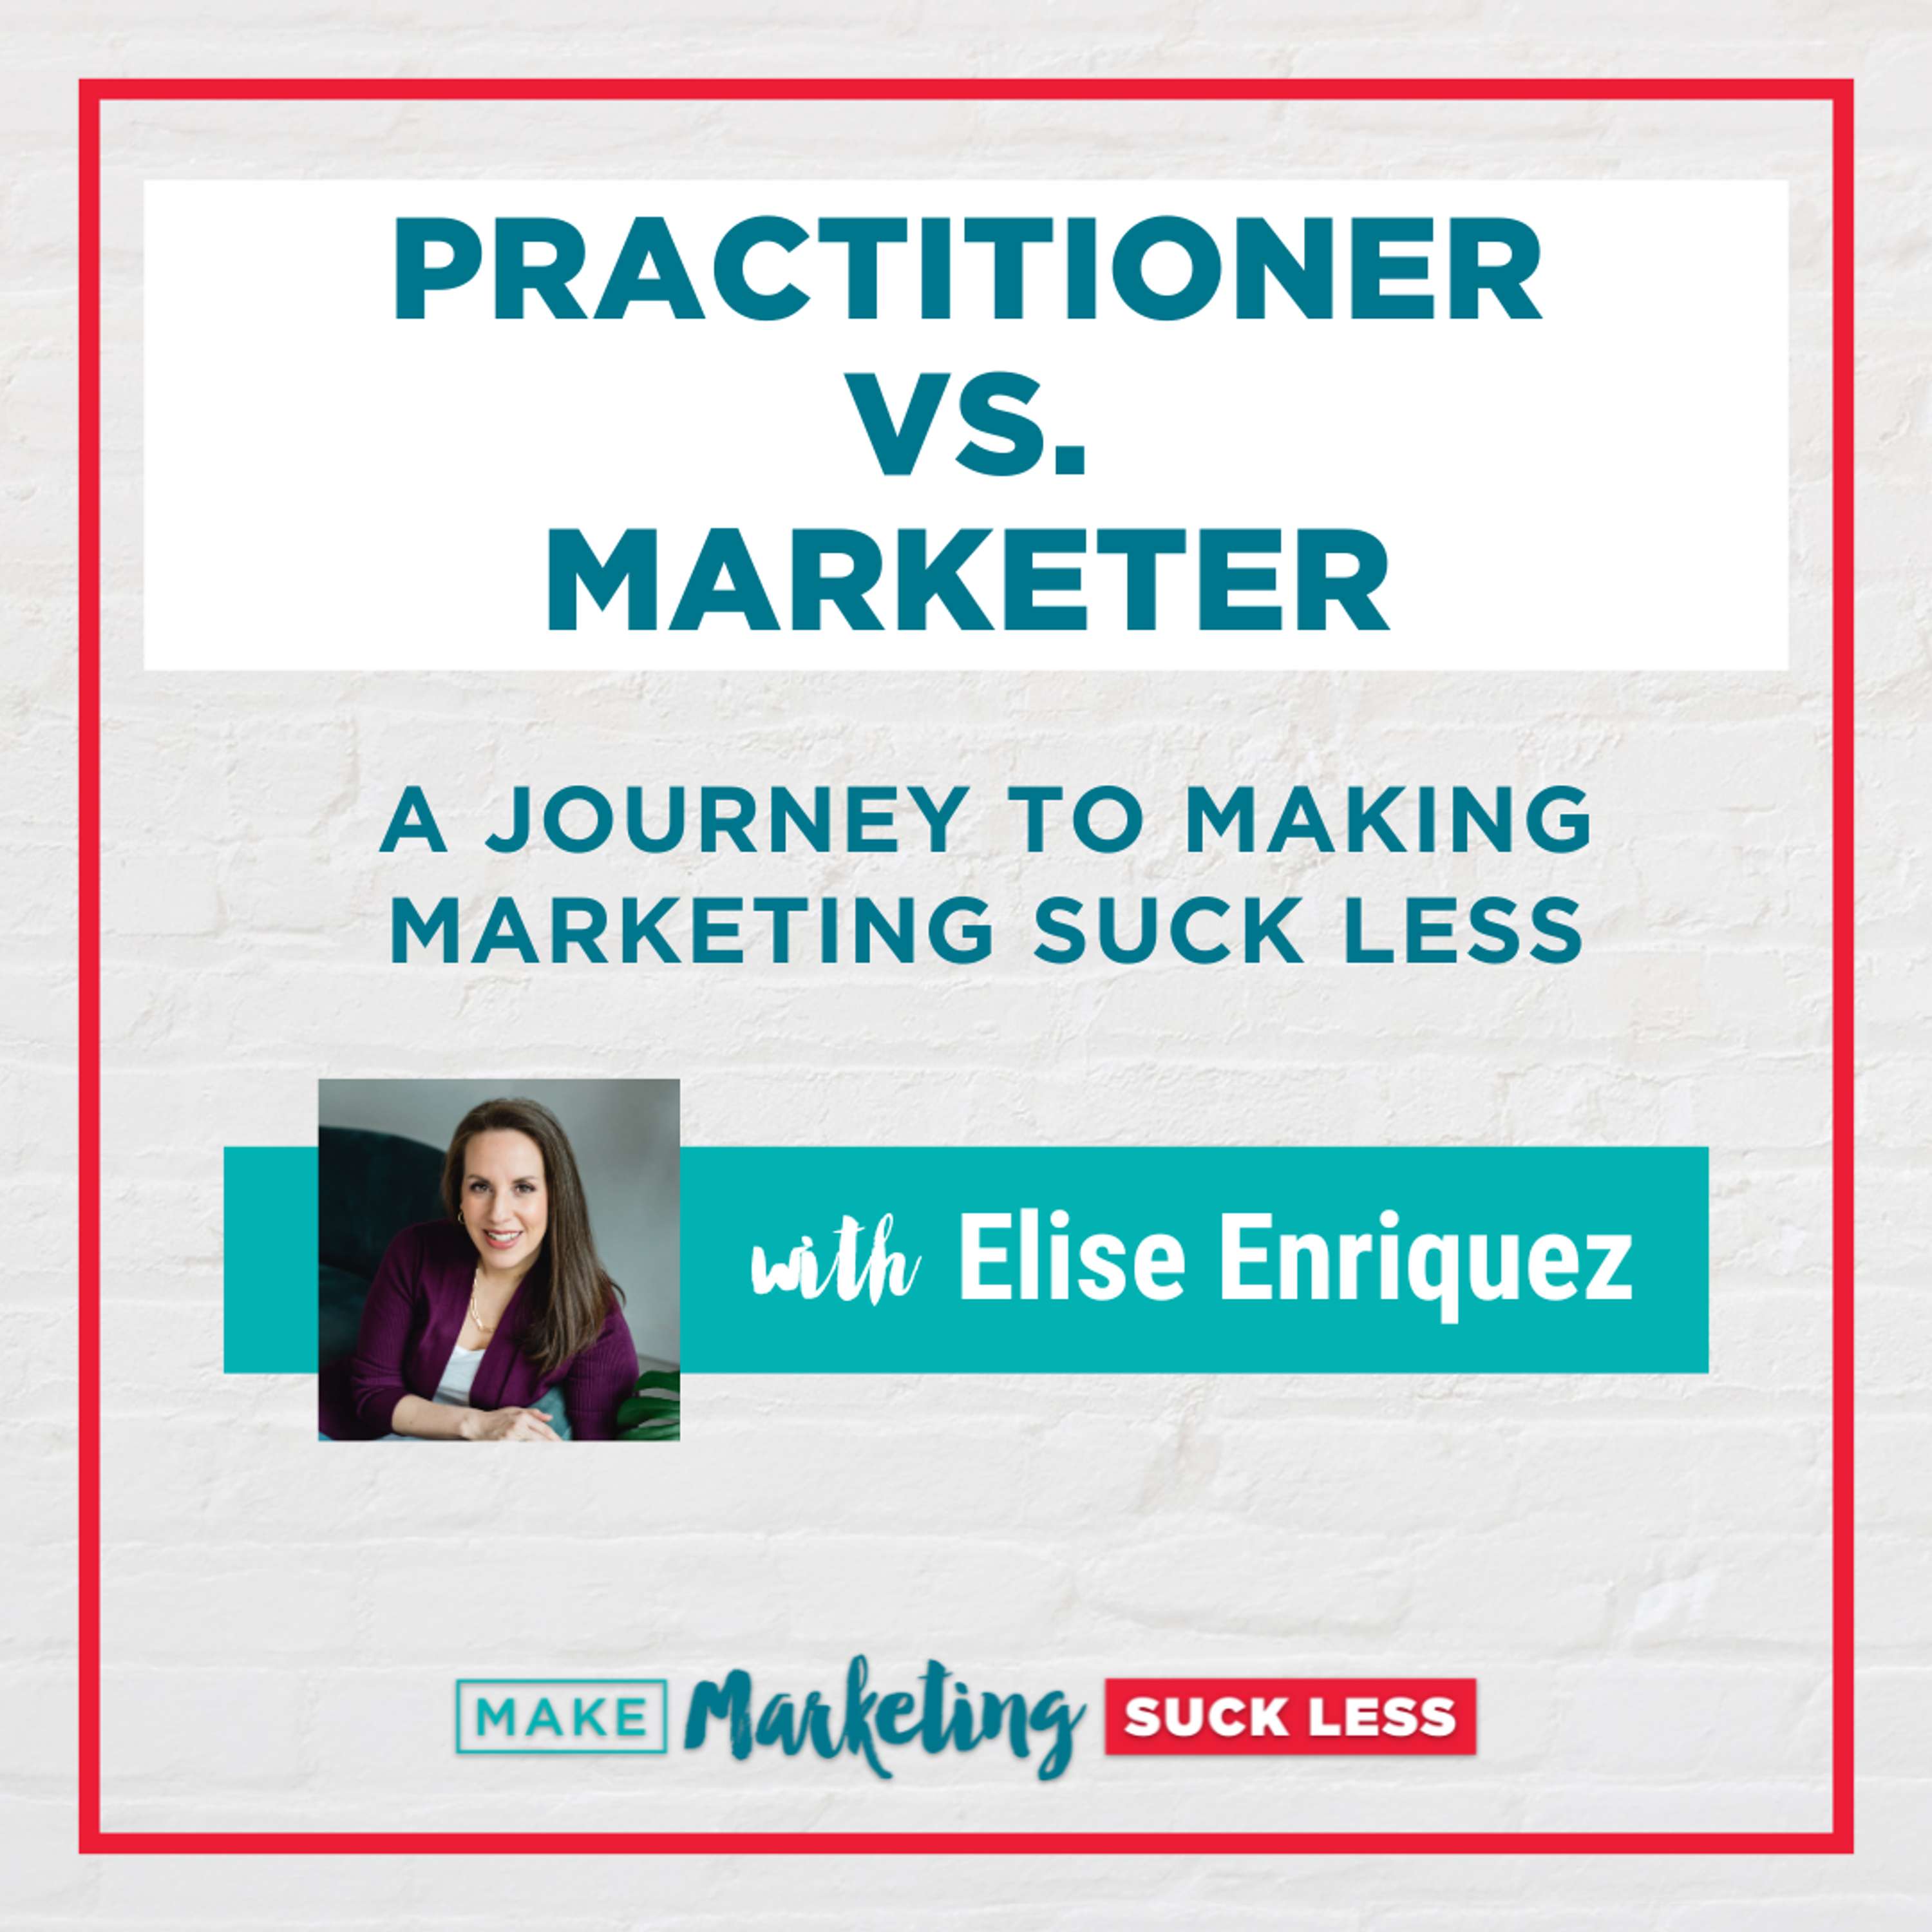 Practitioner vs. Marketer: A Journey To Making Marketing Suck Less with Elise Enriquez